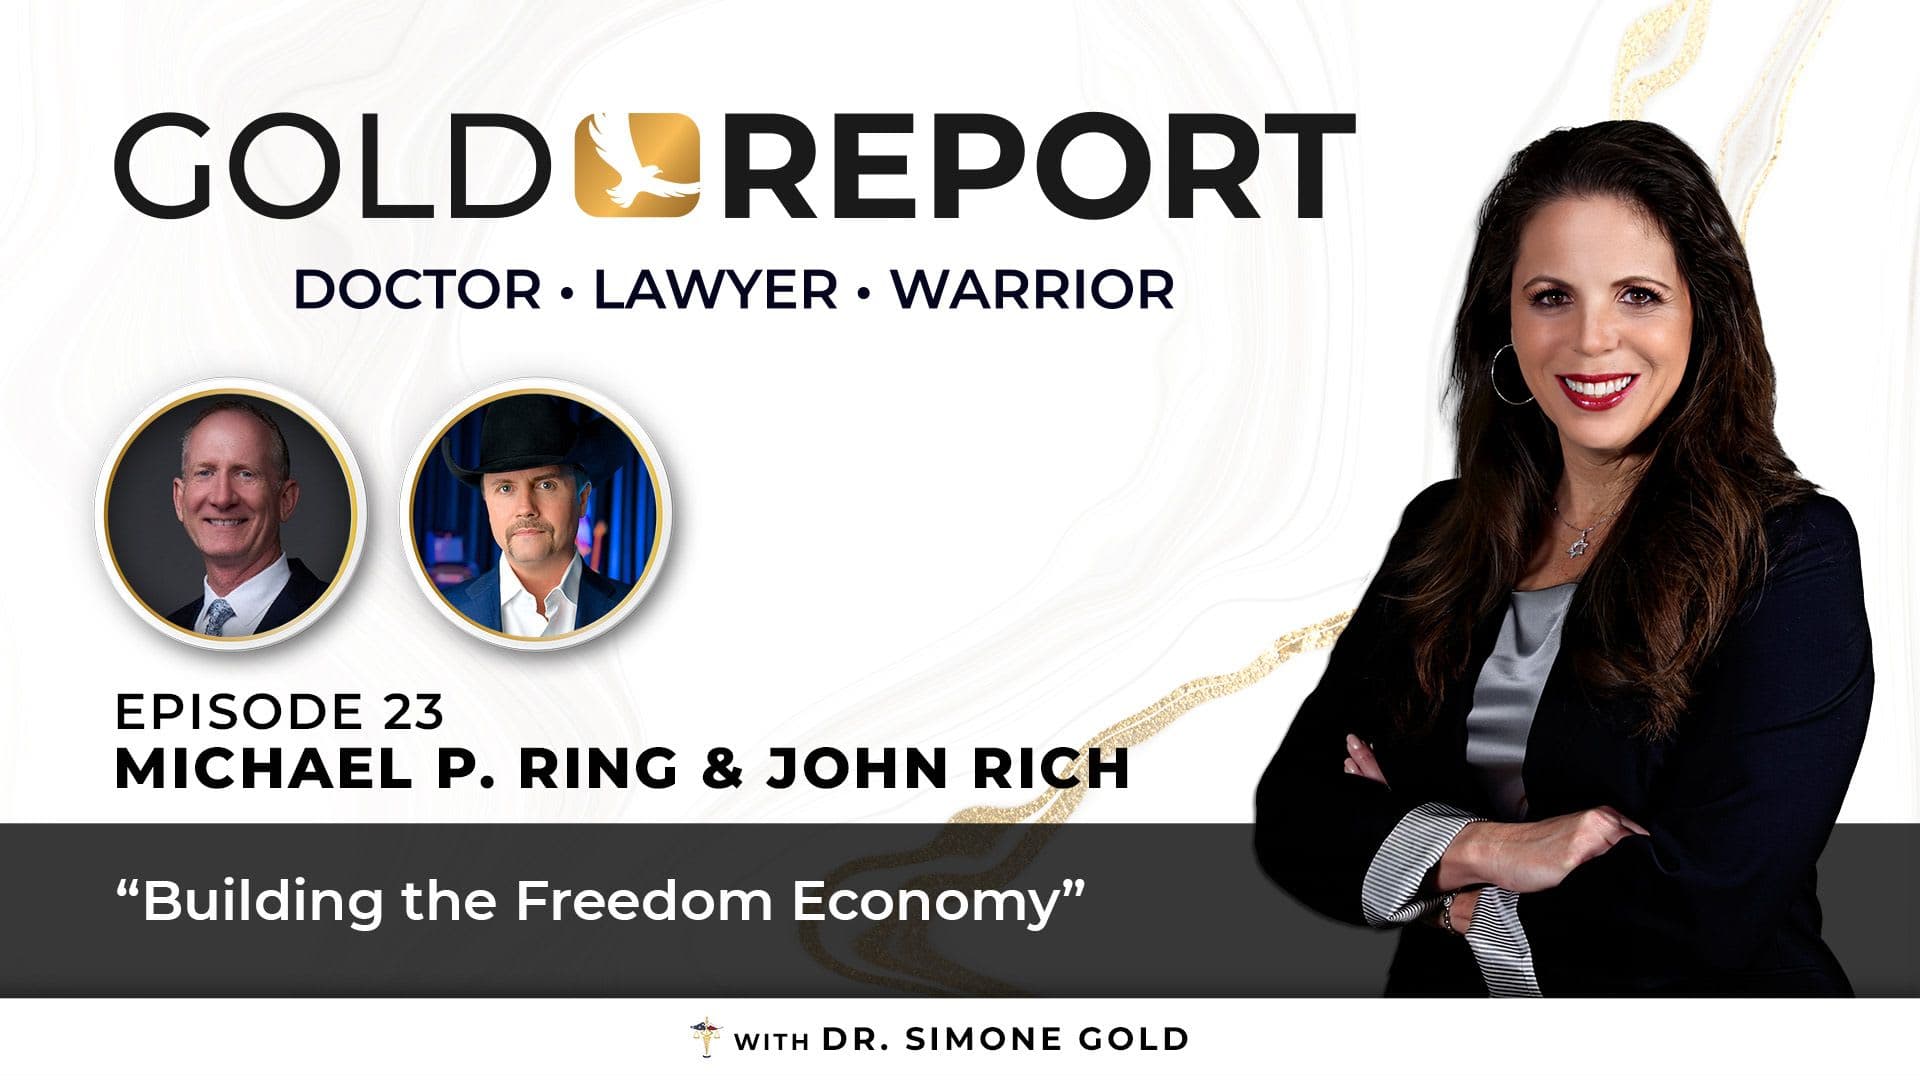 The Gold Report: Ep. 23 'Building the Freedom Economy' with Michael P. Ring and John Rich